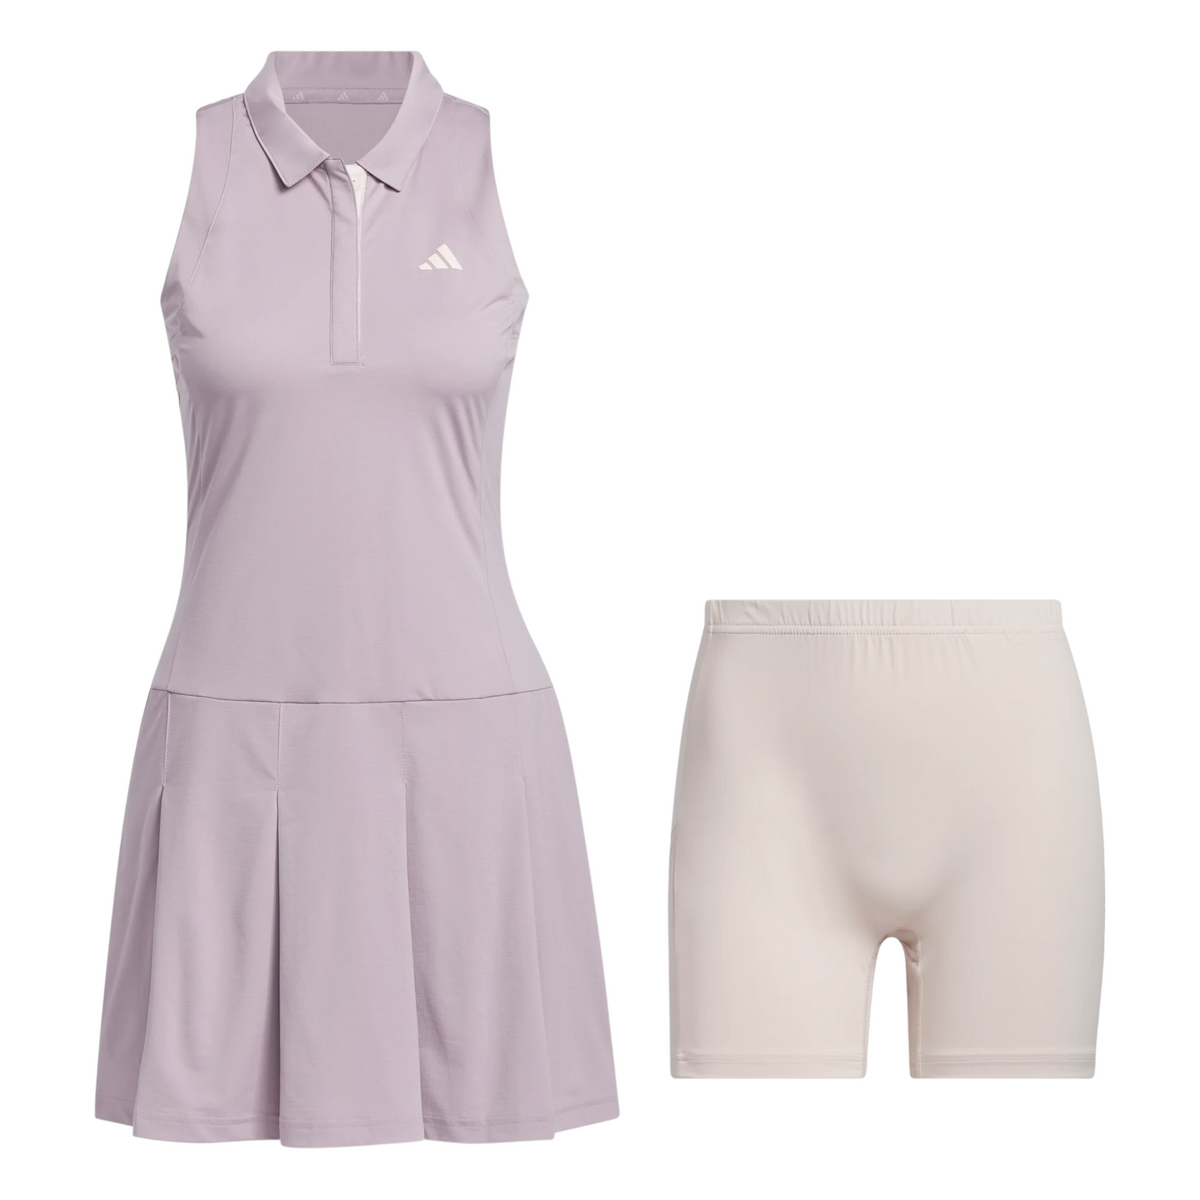 Adidas Ultimate365 Tour Pleated Golf Dress - Womens